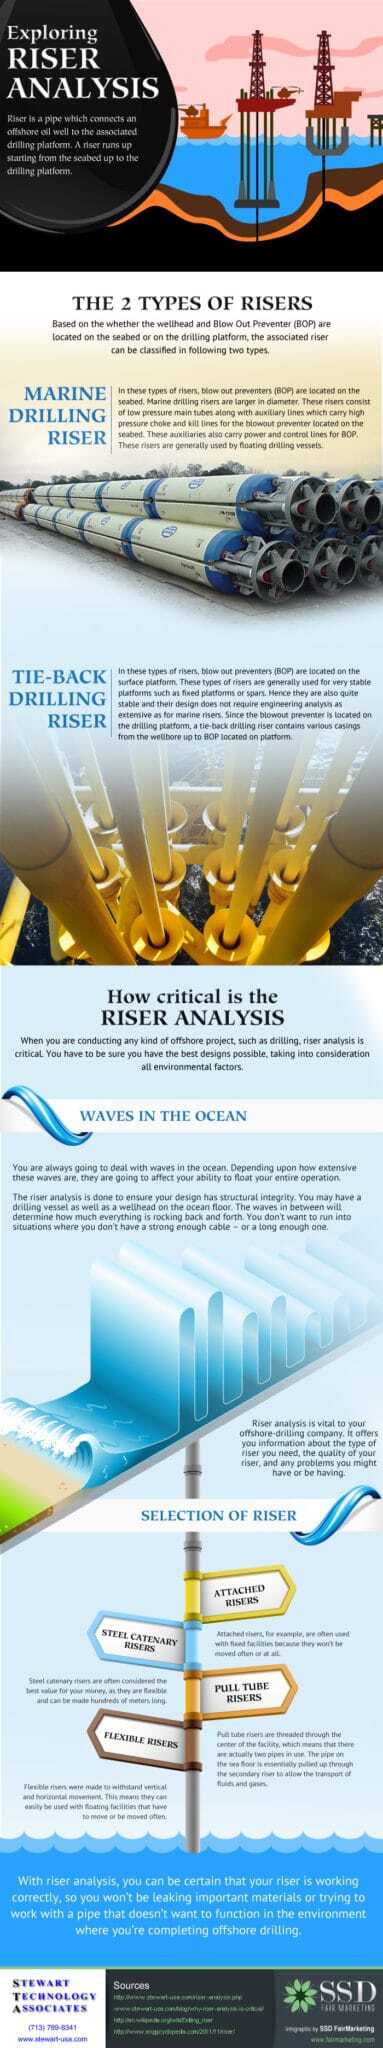 riser analysis infographic march 2014